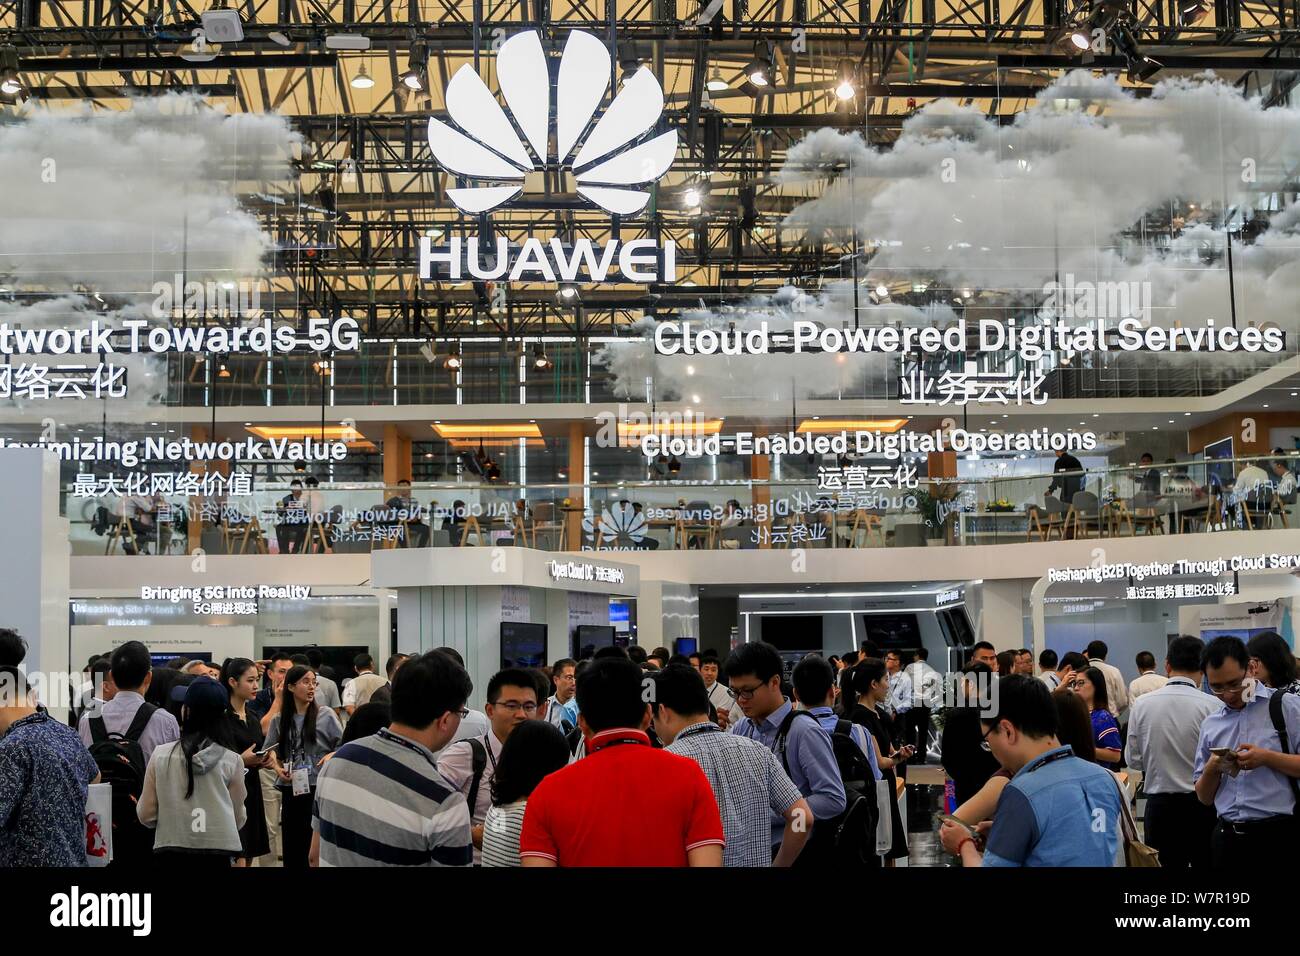 Visitors crowd the stand of Huawei during the 2017 Mobile World Congress (MWC) in Shanghai, China, 28 June 2017.   The Mobile World Congress 2017 open Stock Photo